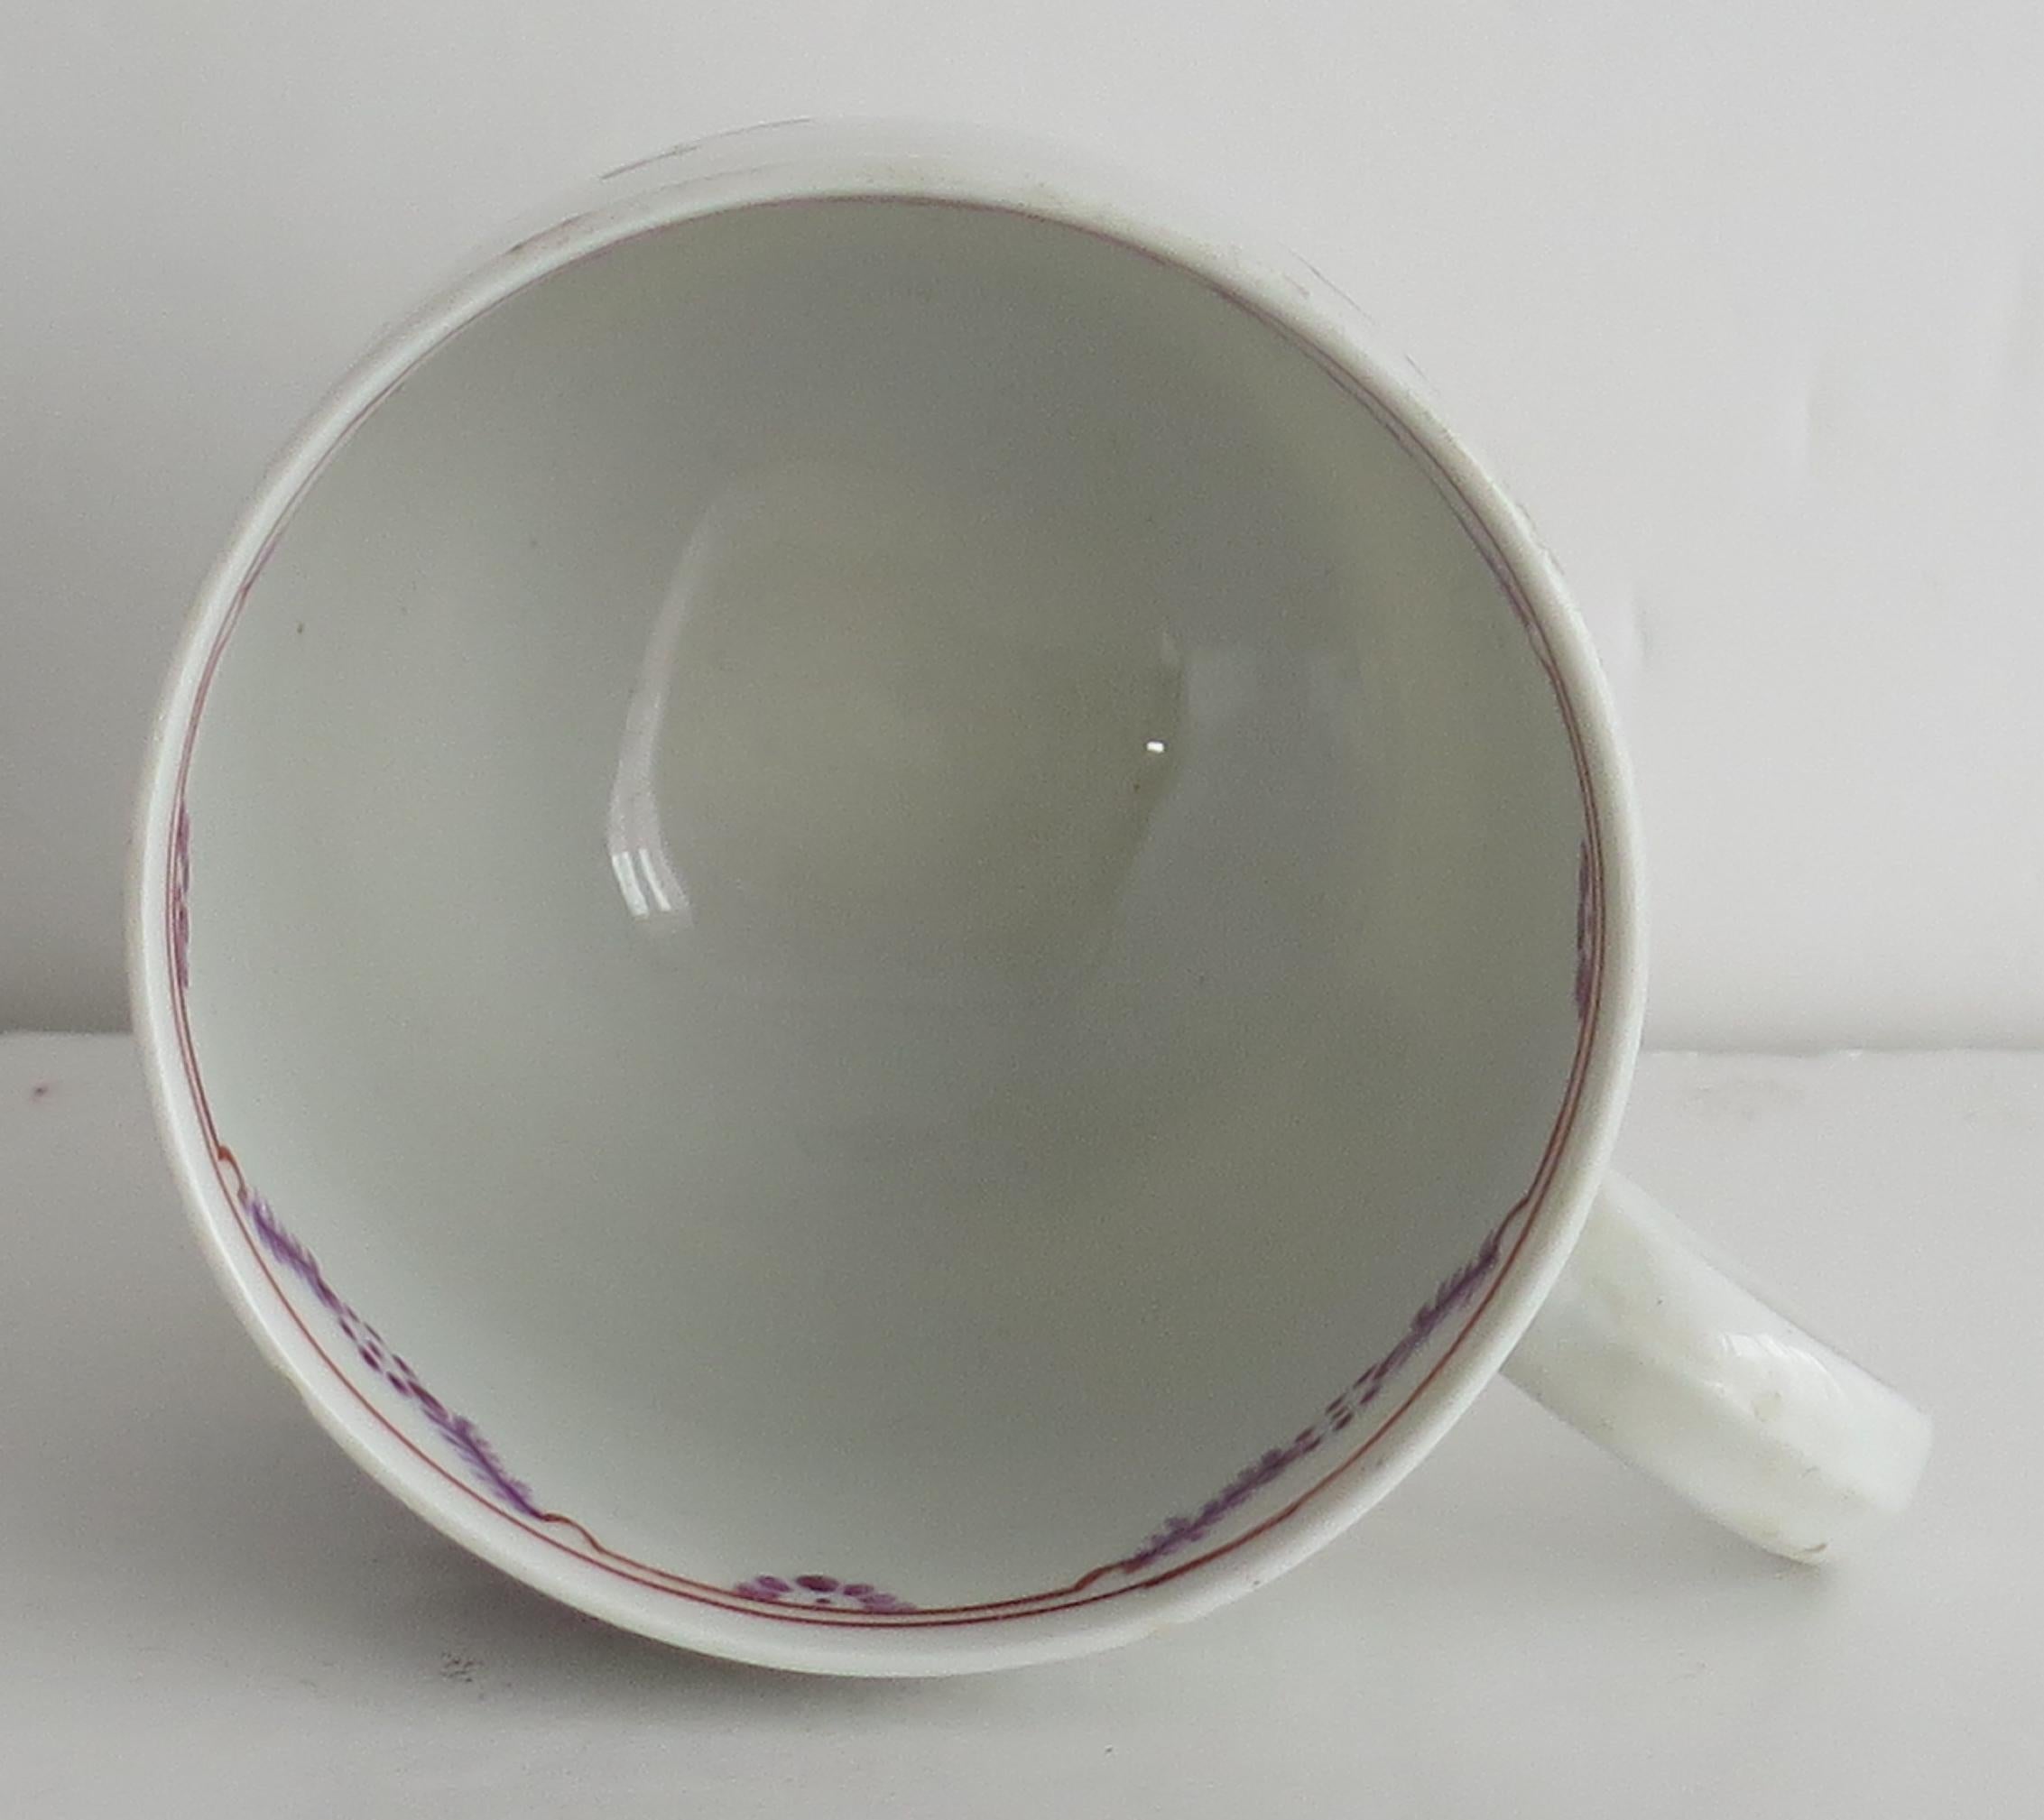 Glazed 18th Century Newhall Porcelain Coffee Cup Pattern 139, Circa 1790 For Sale